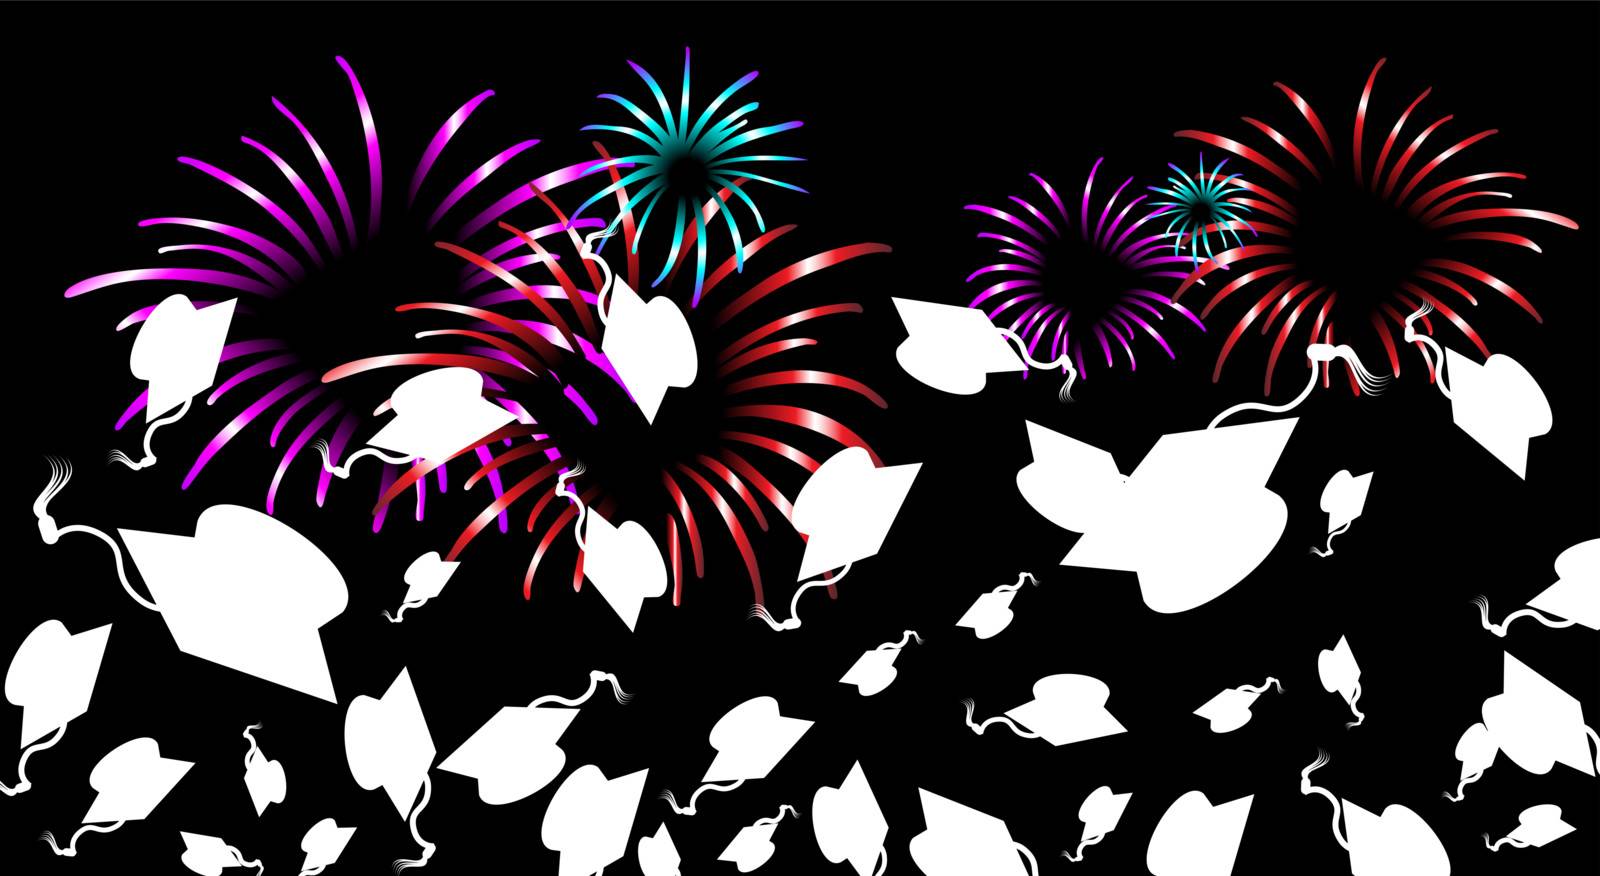 An image representing graduation with fireworks.